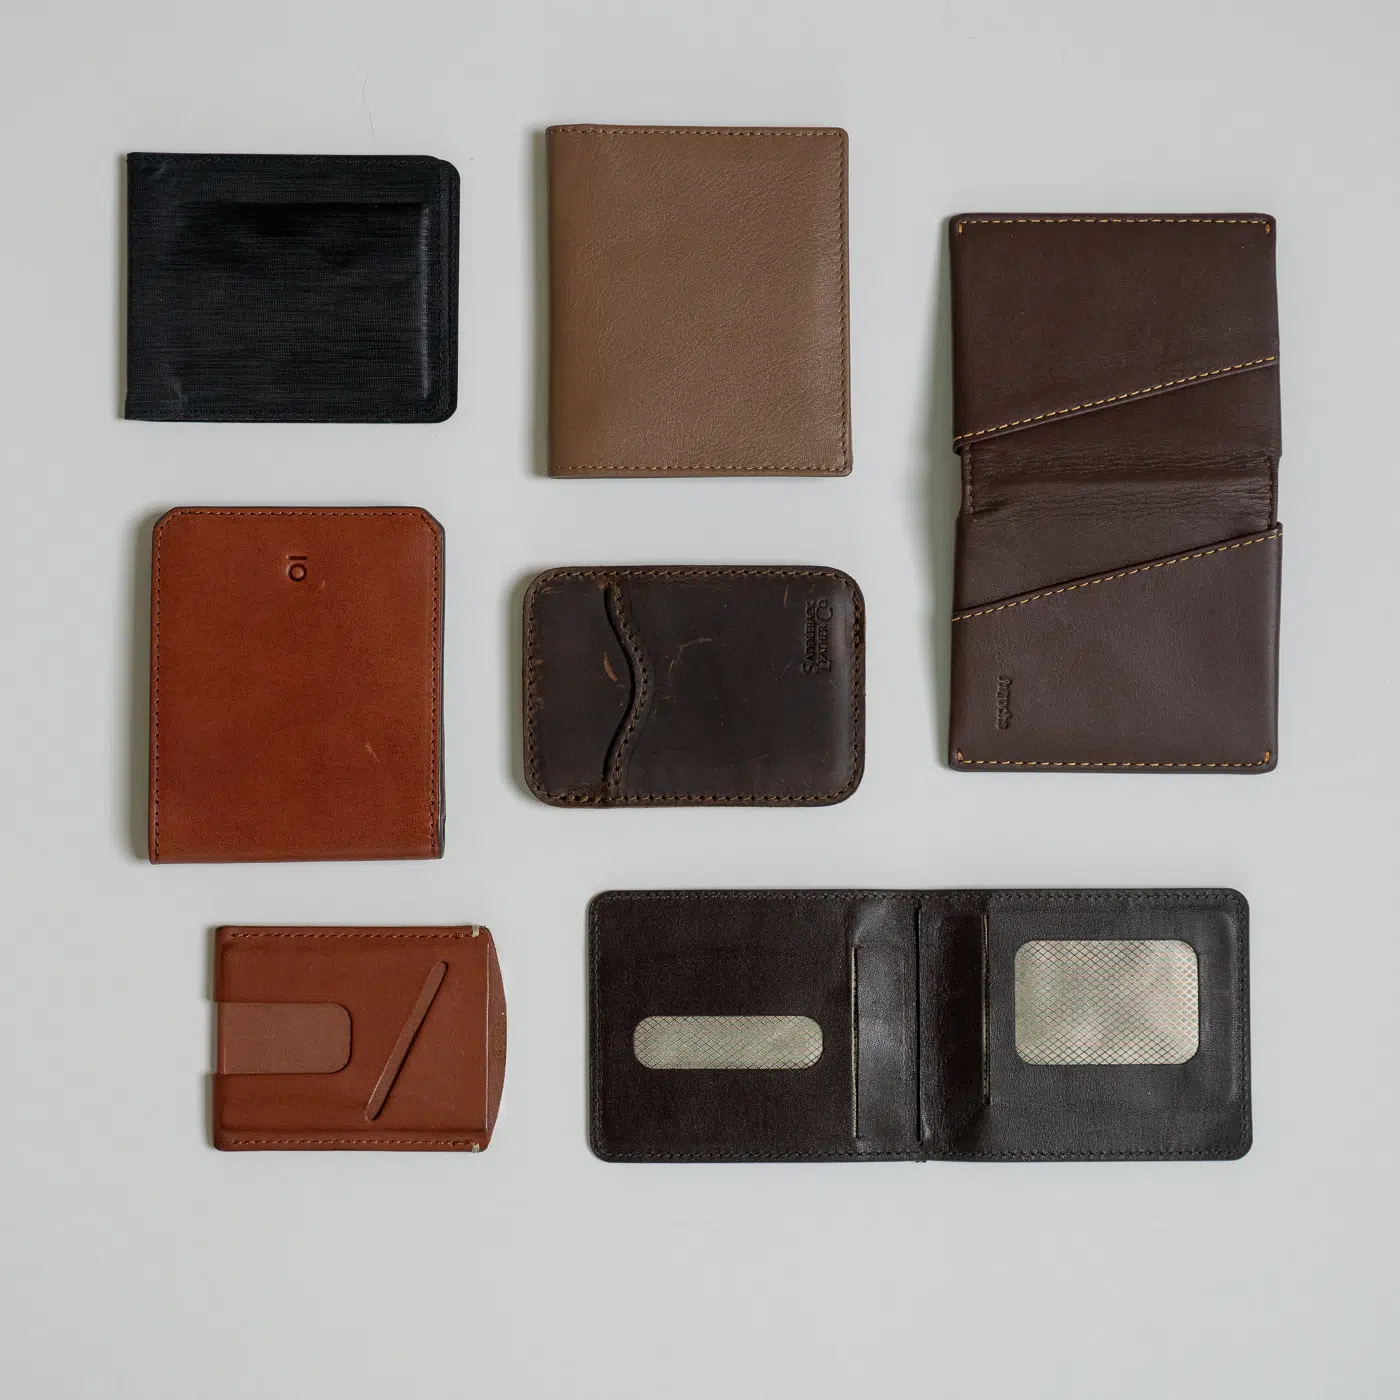 purse business card minimalist fron pocket wallet Horween wallet in Brown Chromexcel leather/mens bifold 